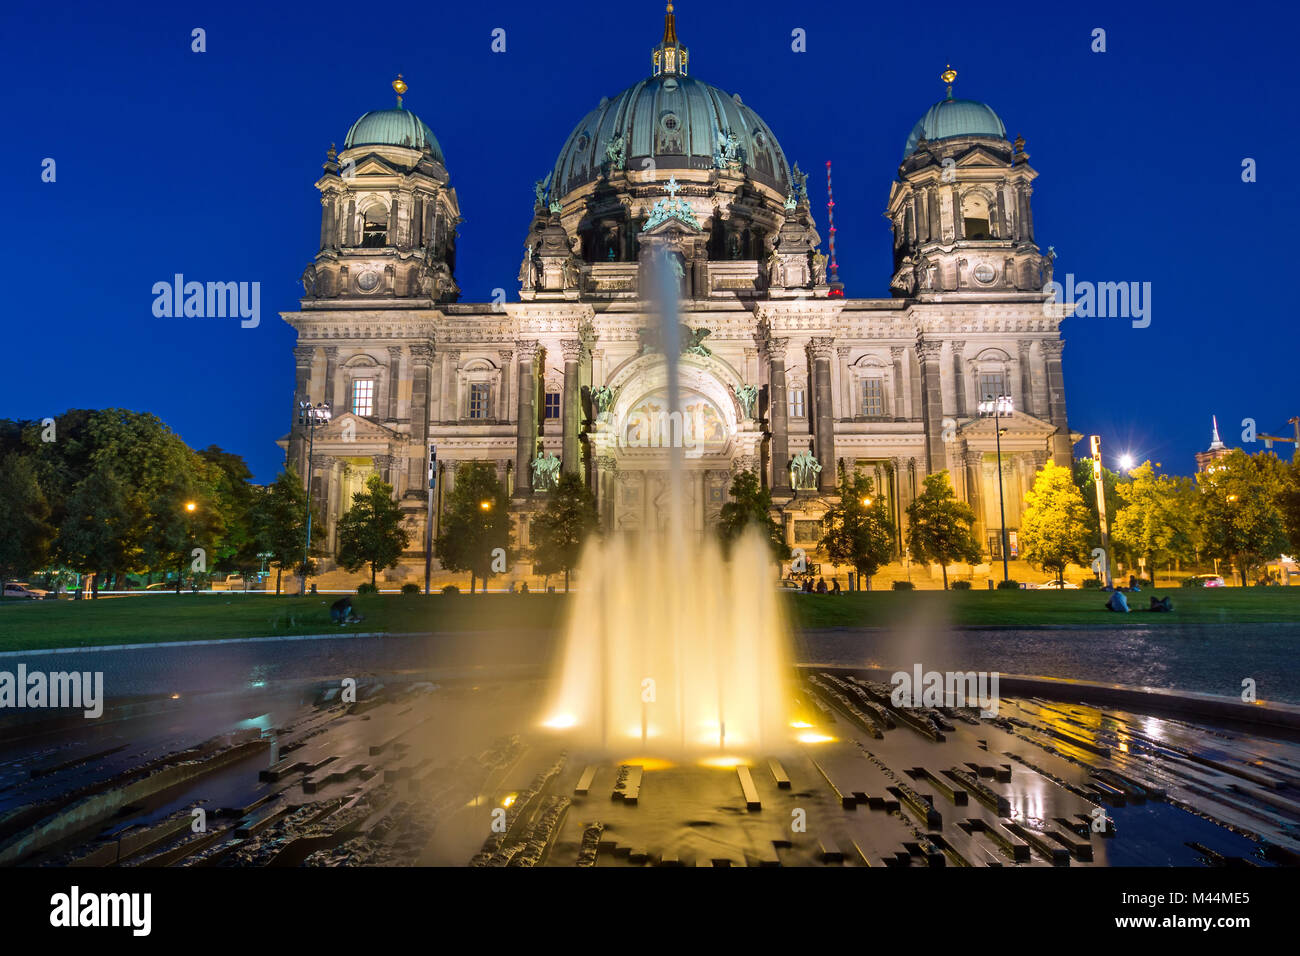 The Berlin Dom and a waterspout fountain at dawn Stock Photo